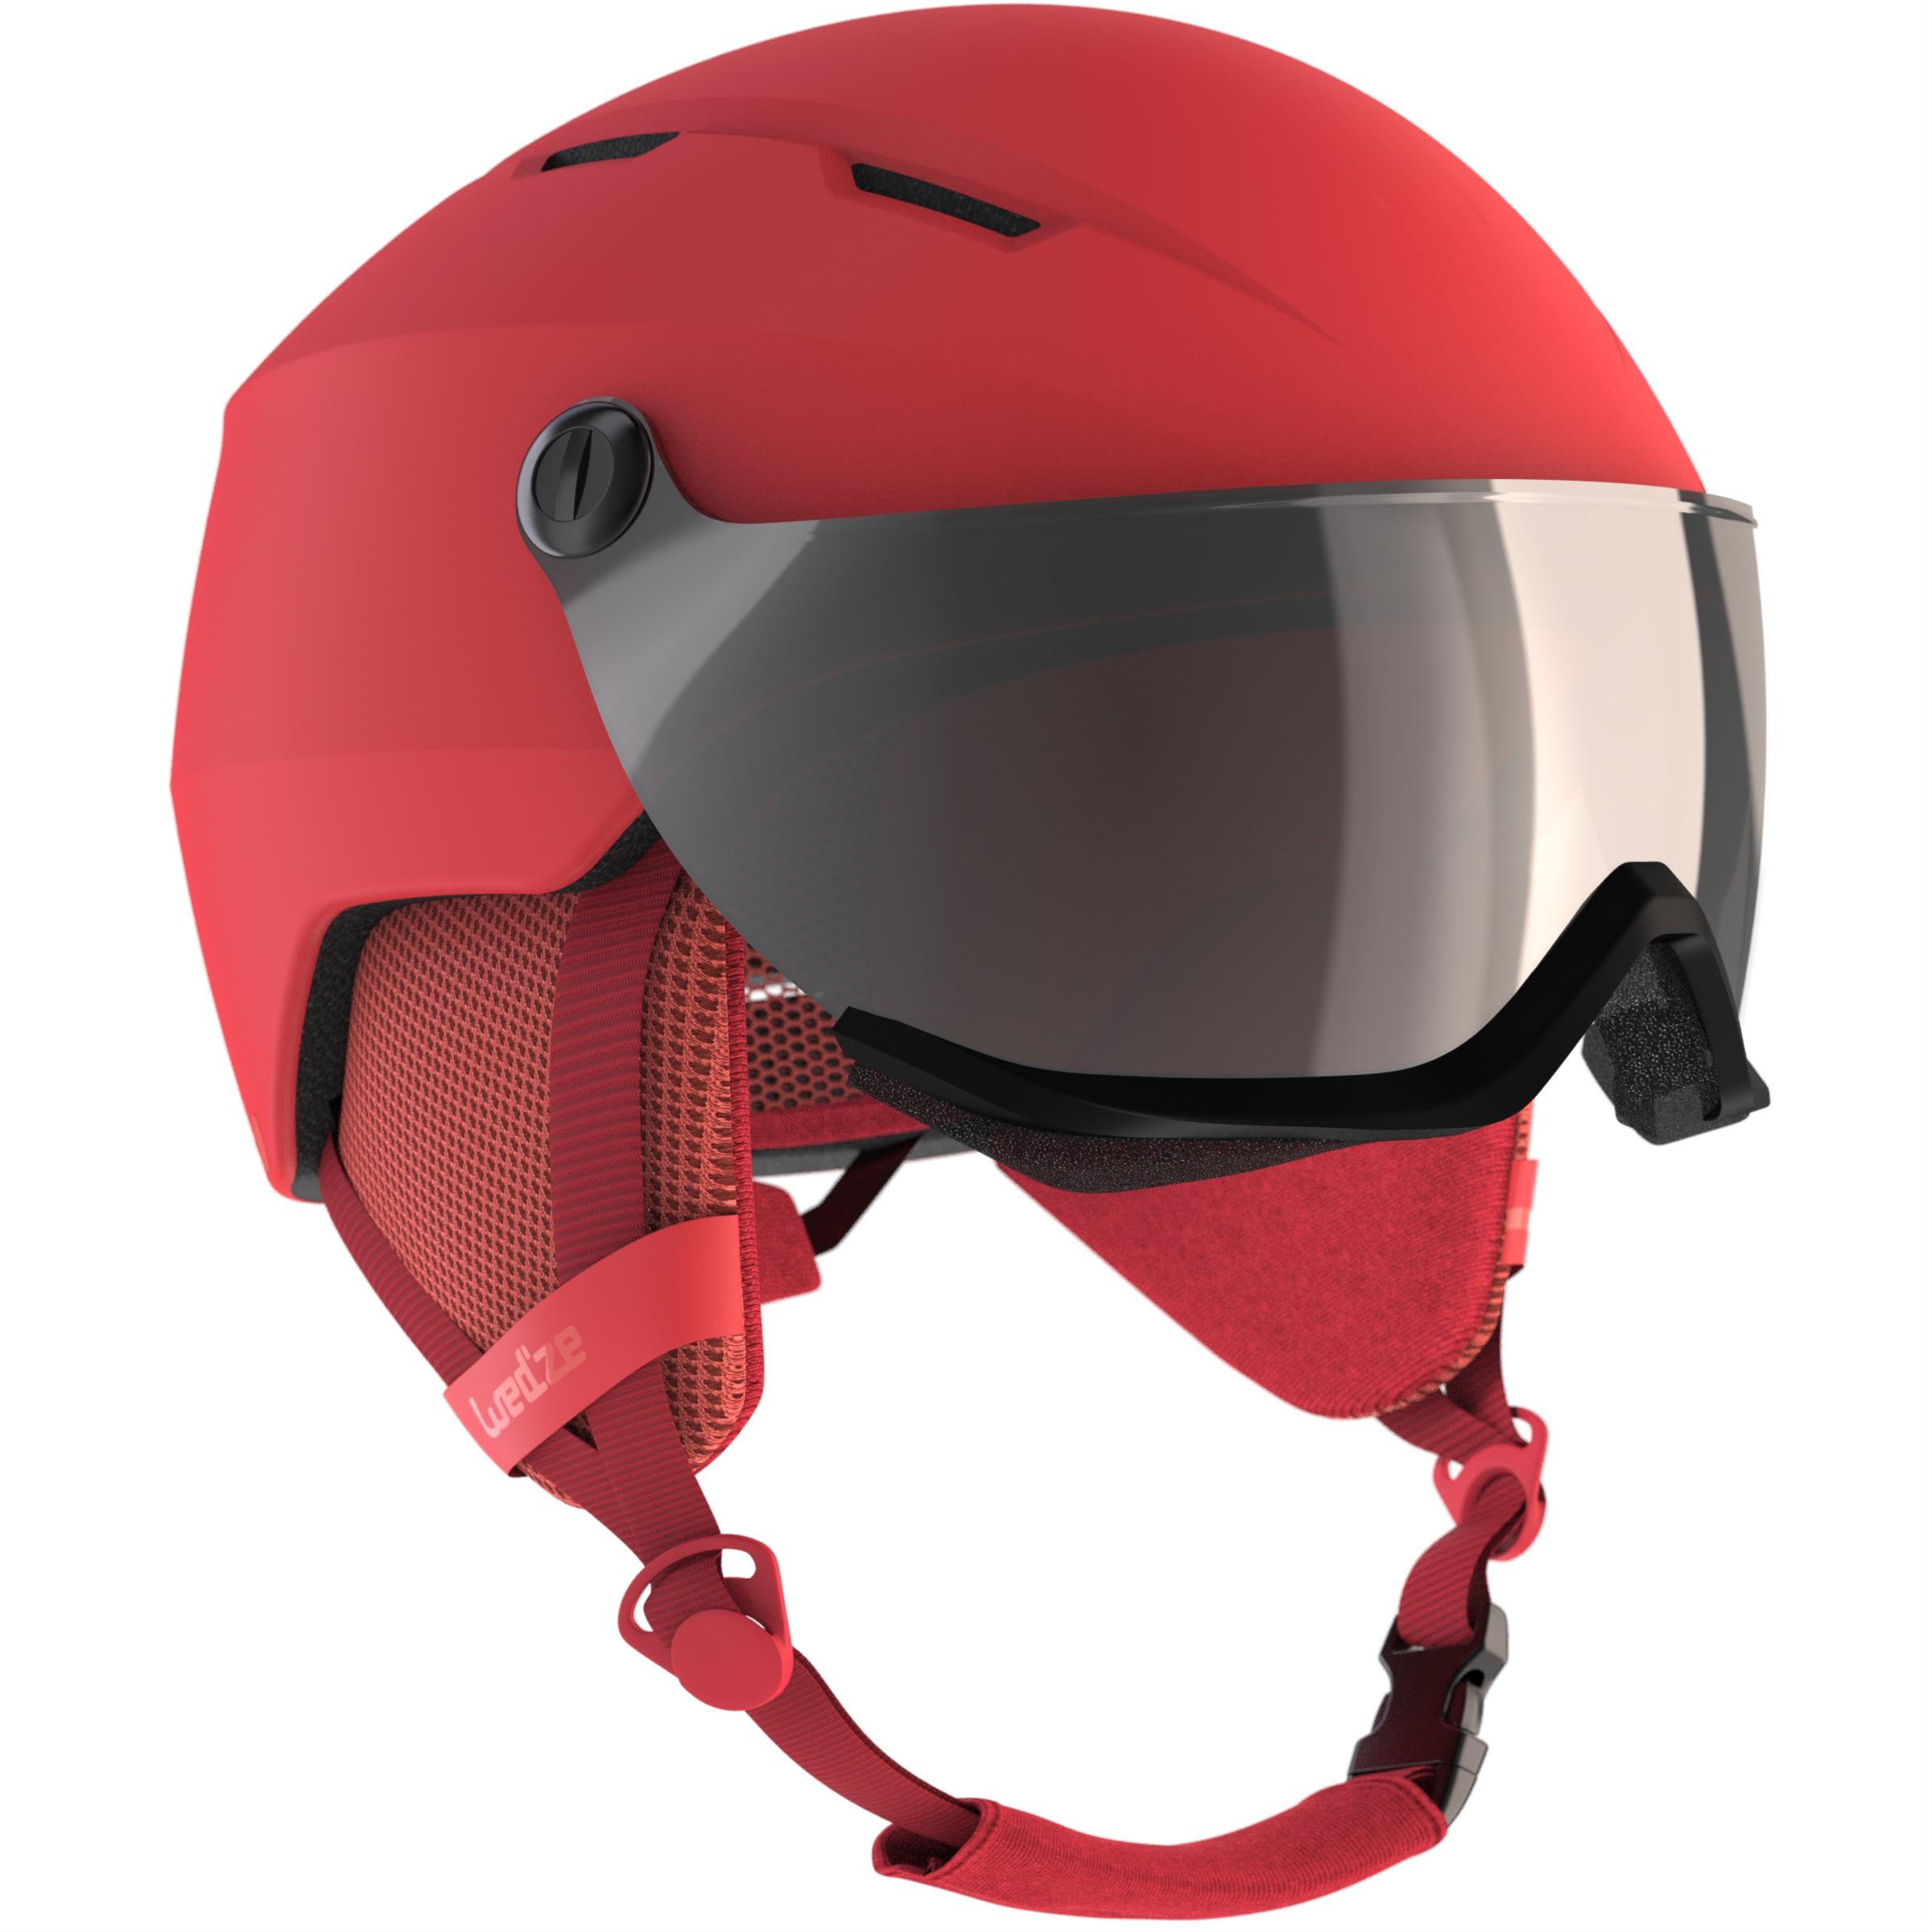 WEDZE ADULTS' DOWNHILL SKI HELMET WITH VISOR H350 - CORAL